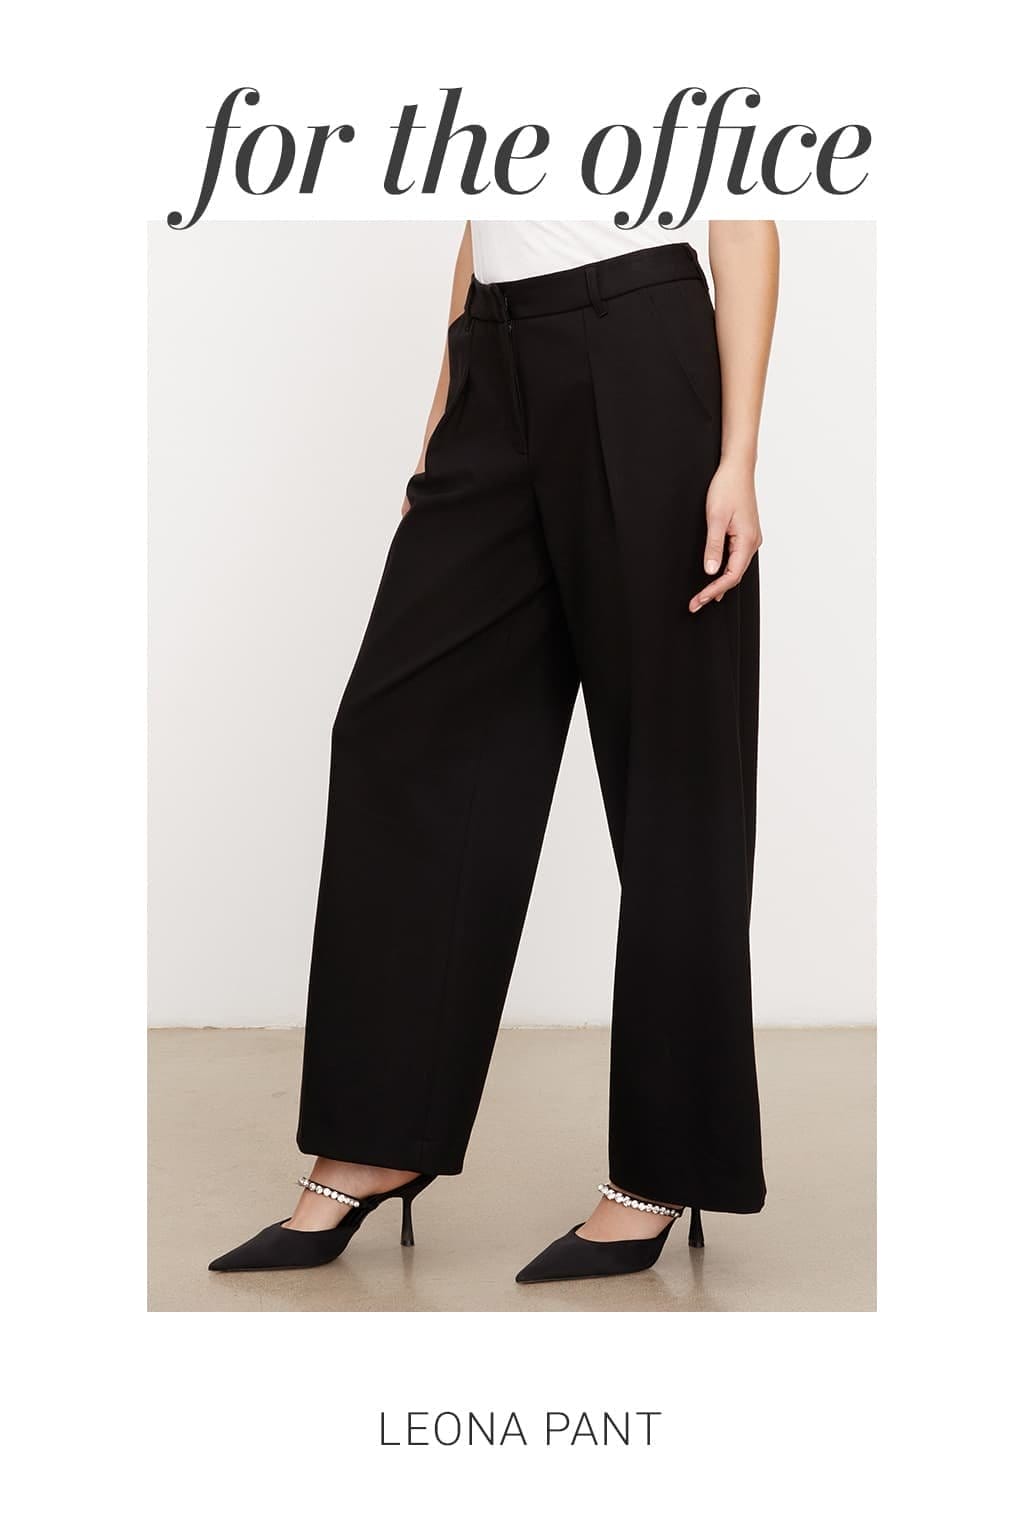 for the office: Model wearing the Leona Pant